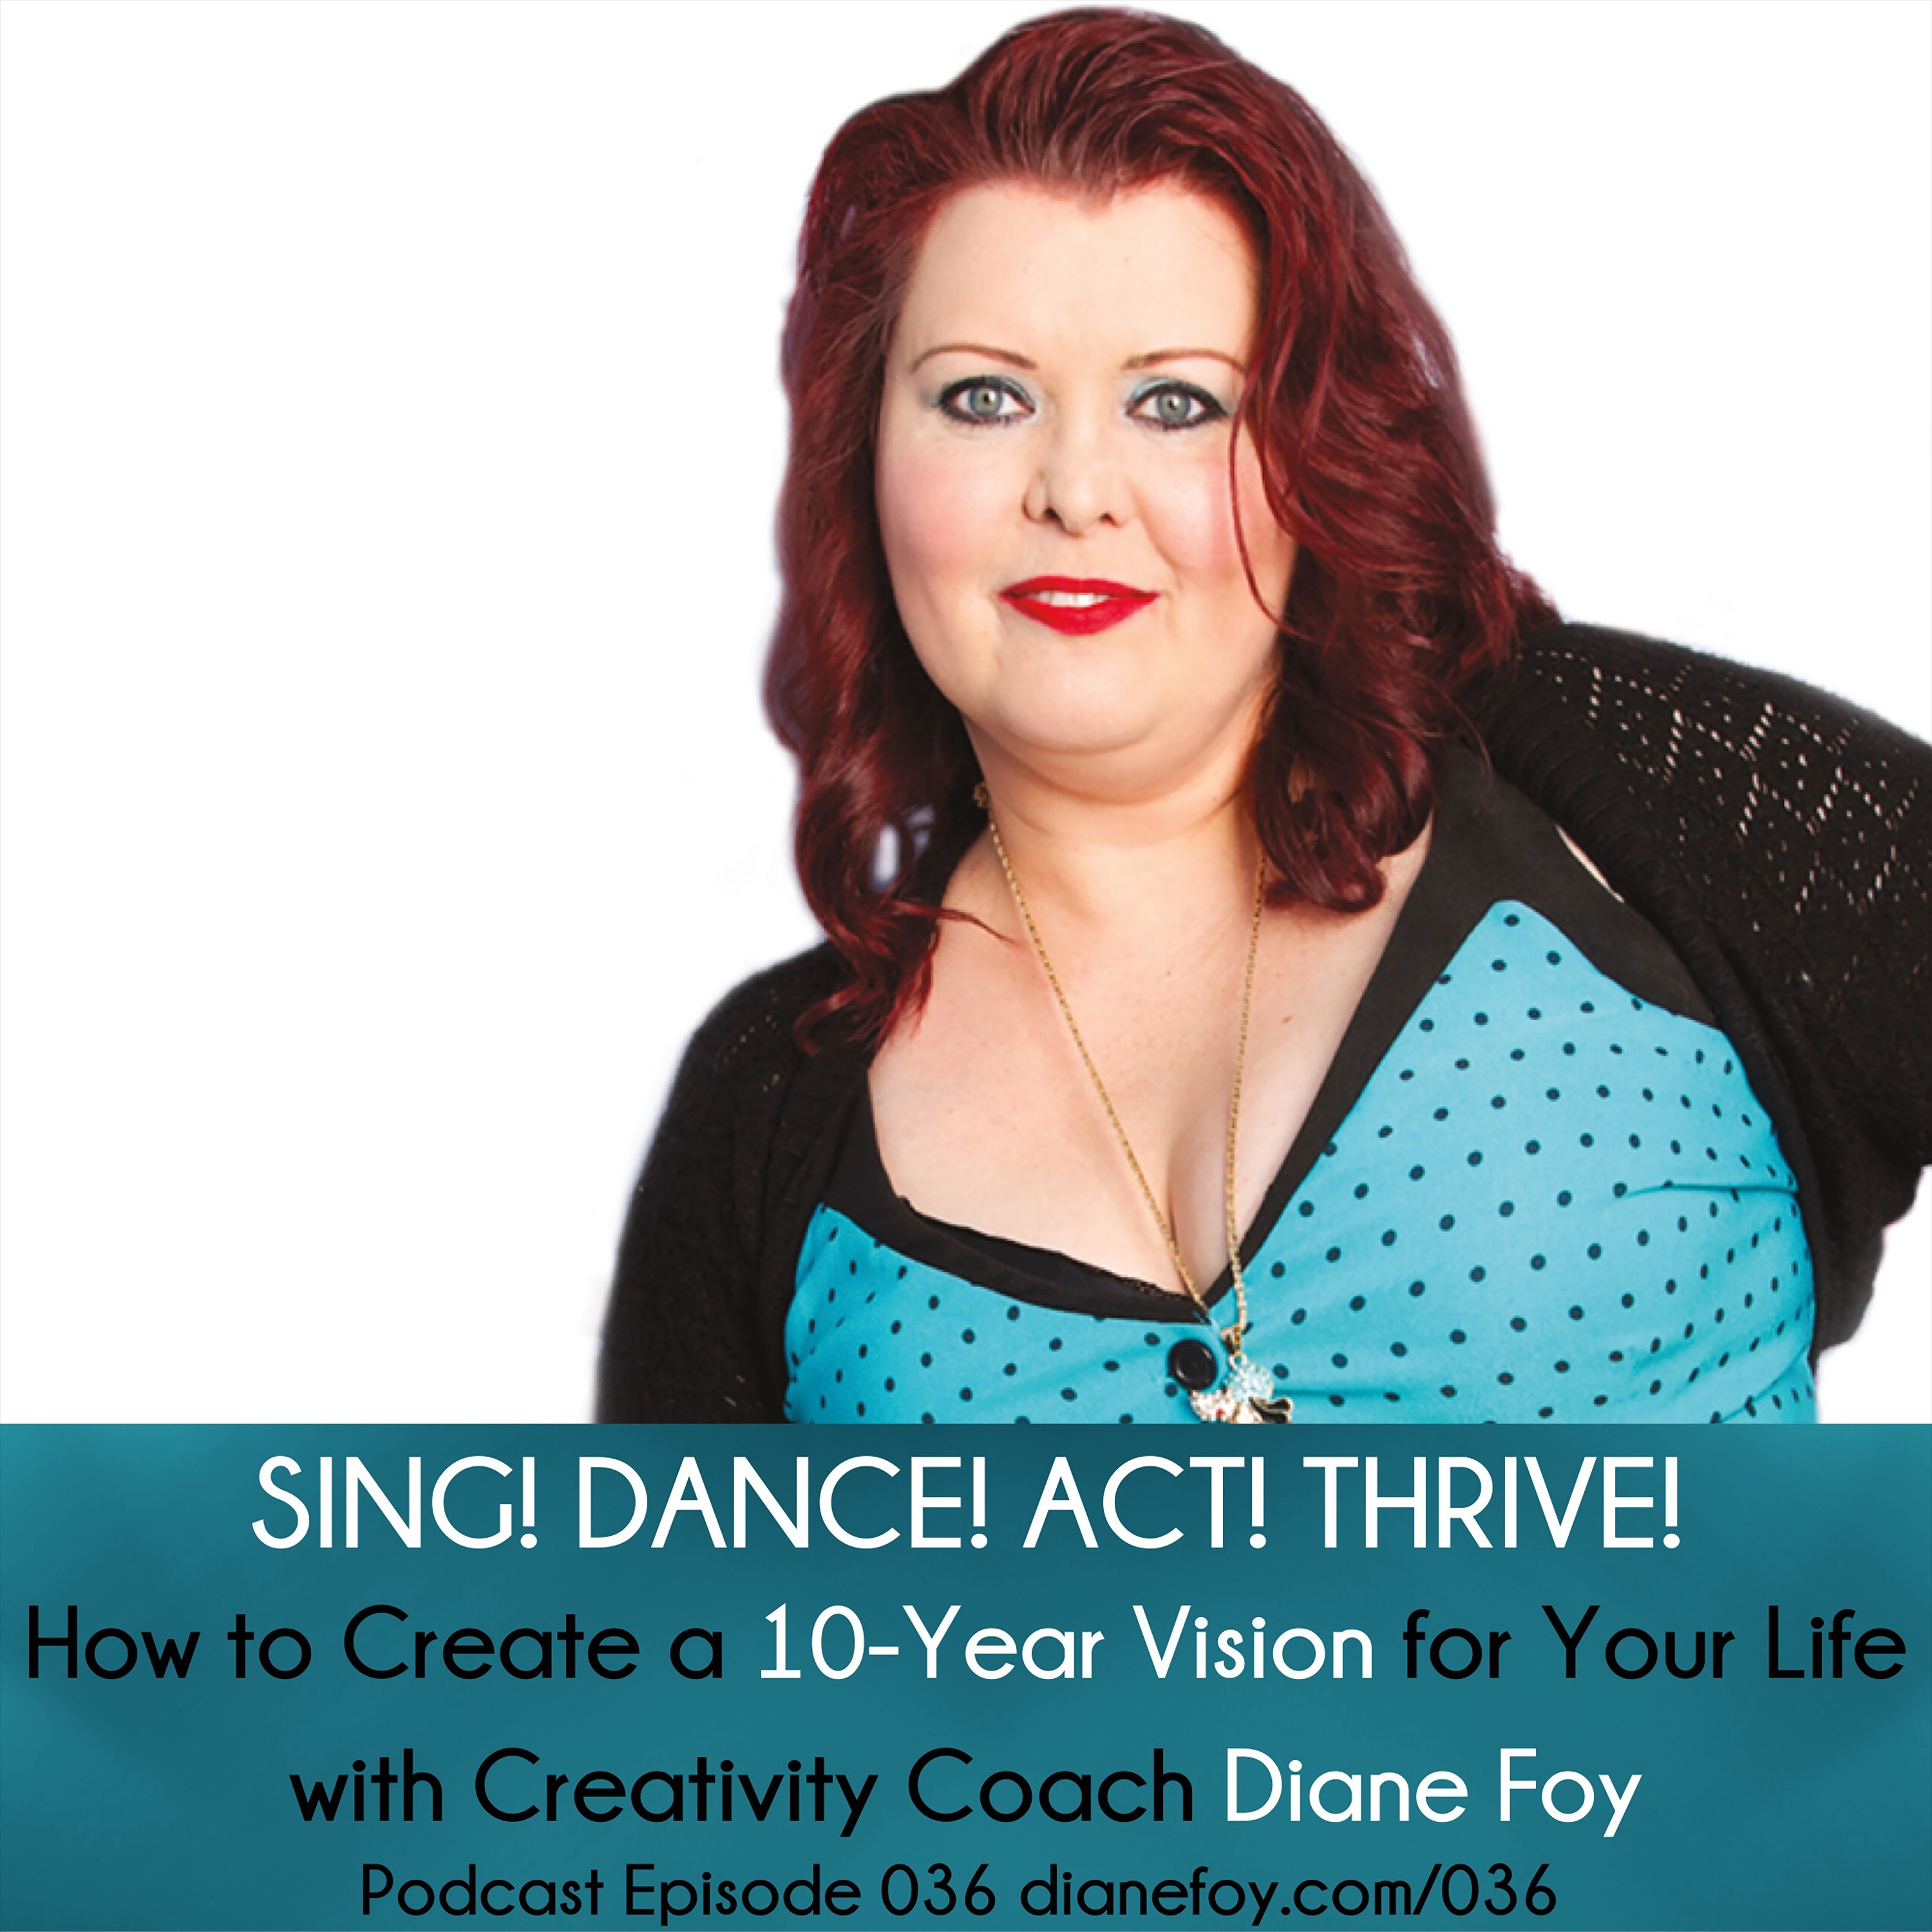 How To Create A 10-Year Vision For Your Life with Creativity Coach Diane Foy